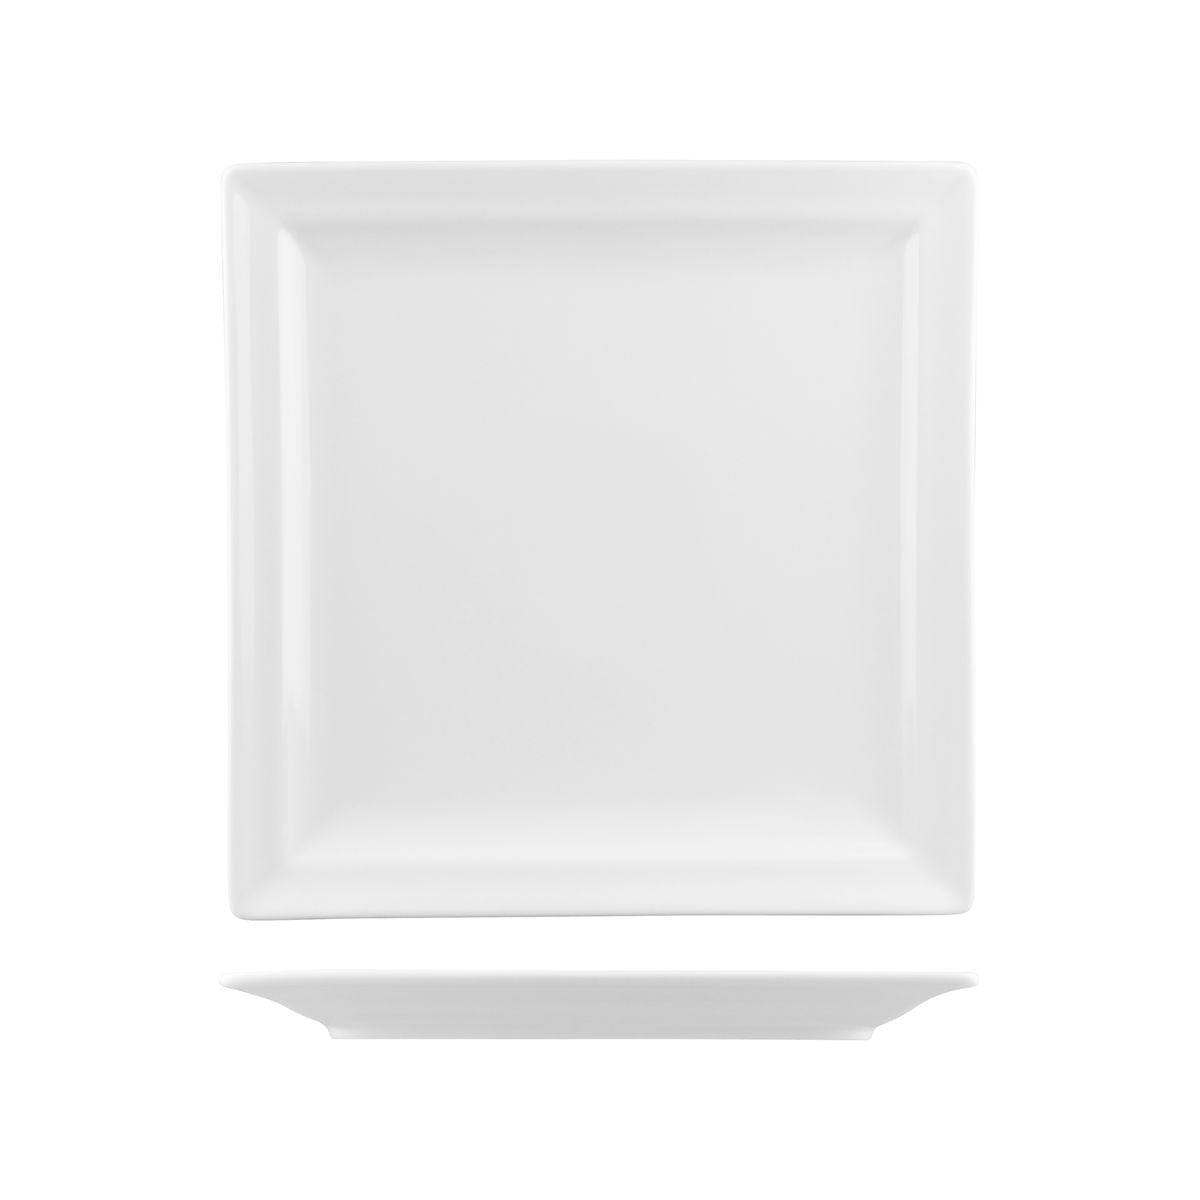 Classic Gourmet Square Plate 300mm: Pack of 6